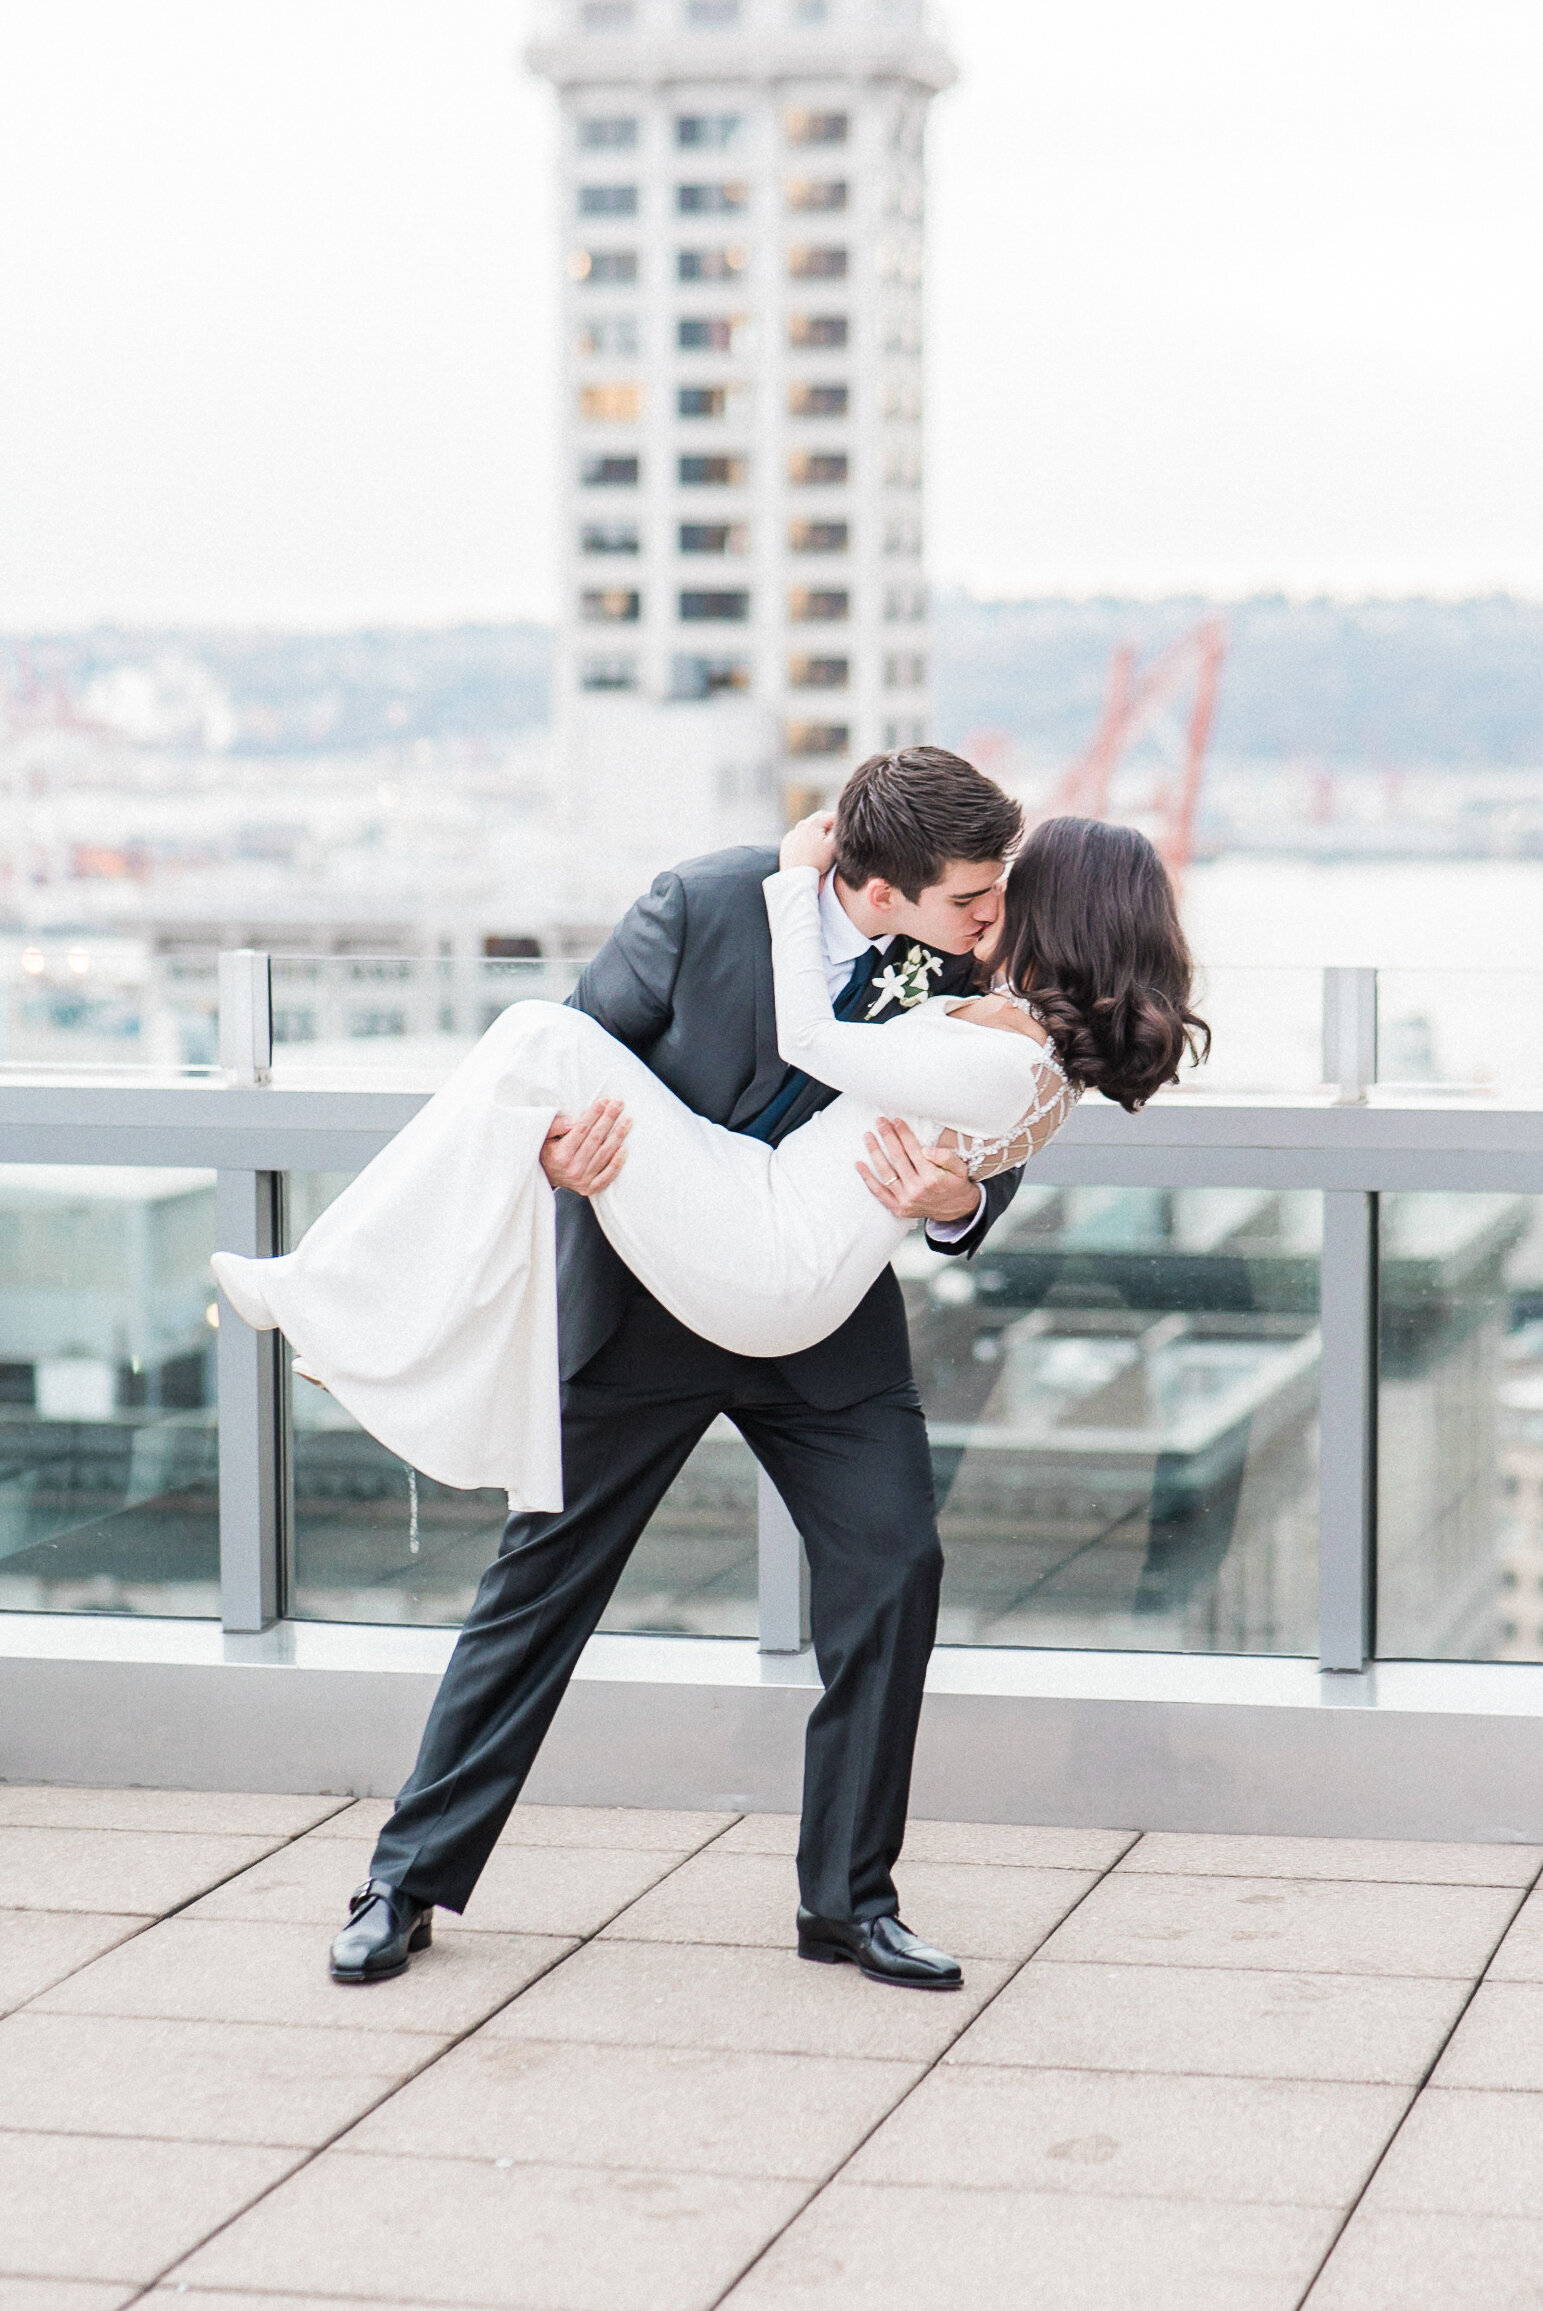 Seattle Courthouse Wedding. Rooftop Elopement.